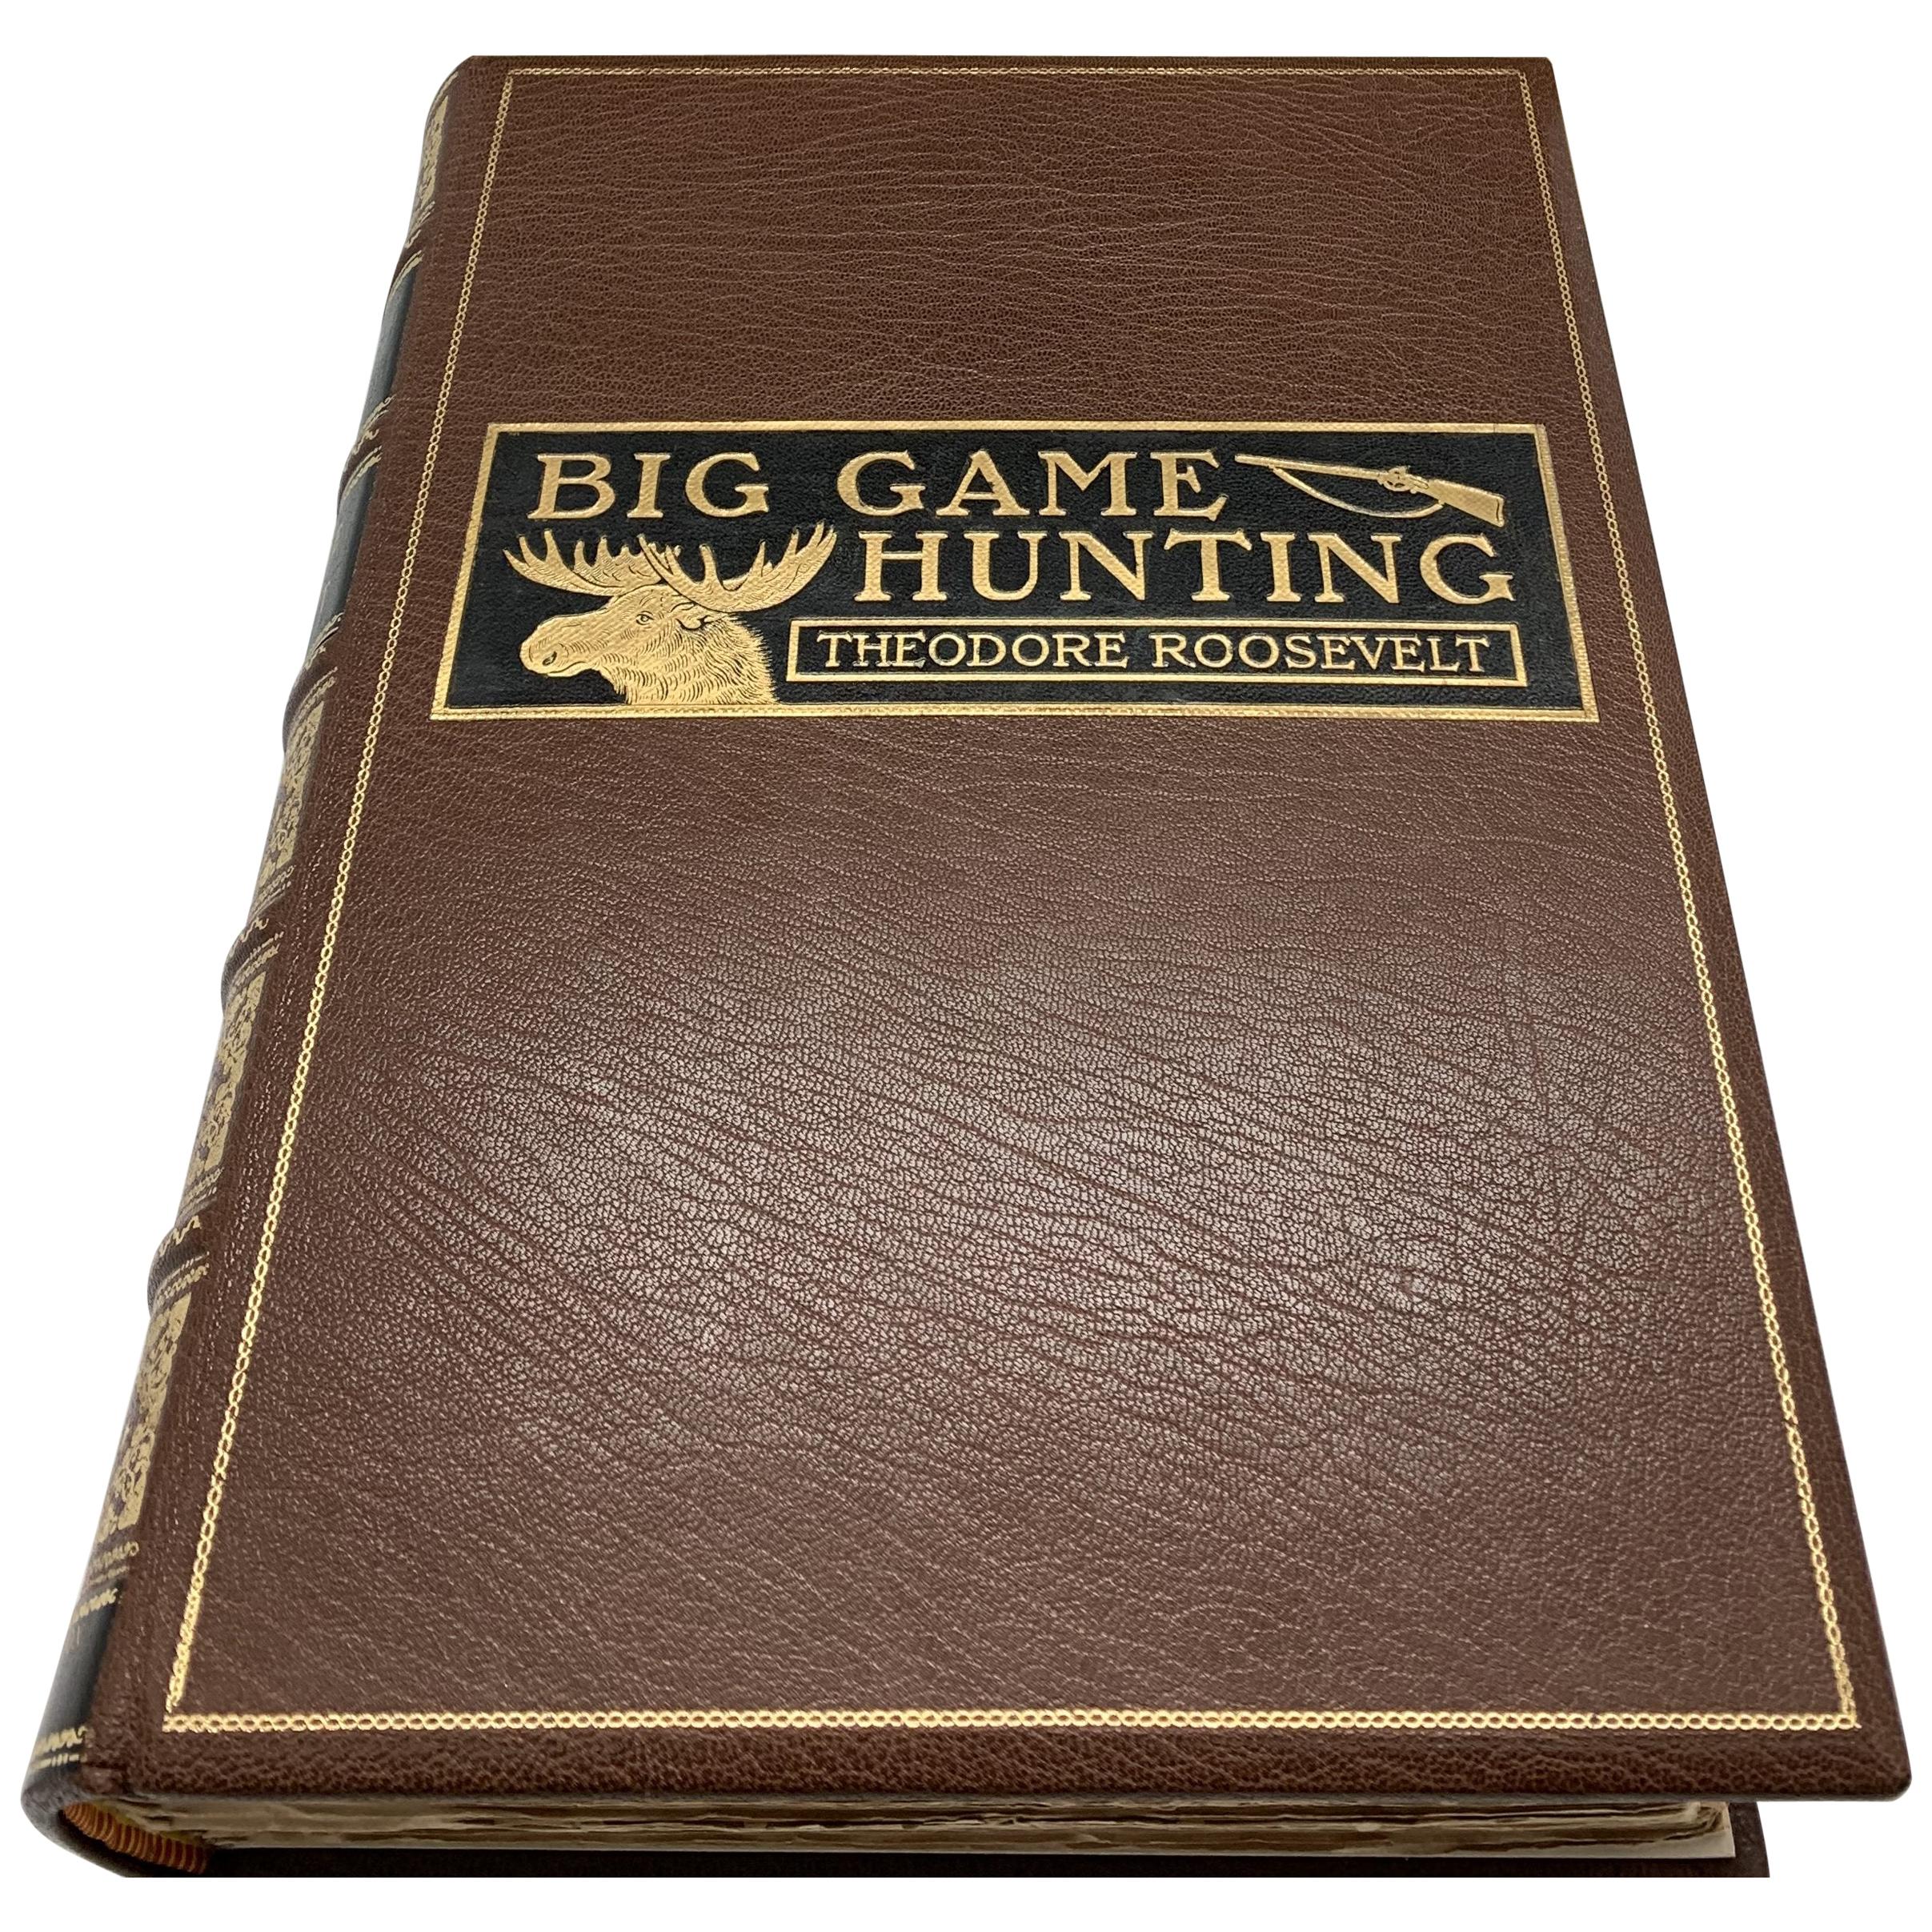 Roosevelt, Theodore. Big Game Hunting. New York: G. P. Putnam’s Sons, 1899. Signed by Theodore Roosevelt, Limited first Edition, numbered 762 / 1000. Fifty-five Illustrations.

Presented is a limited first edition copy of Big Game Hunting in the